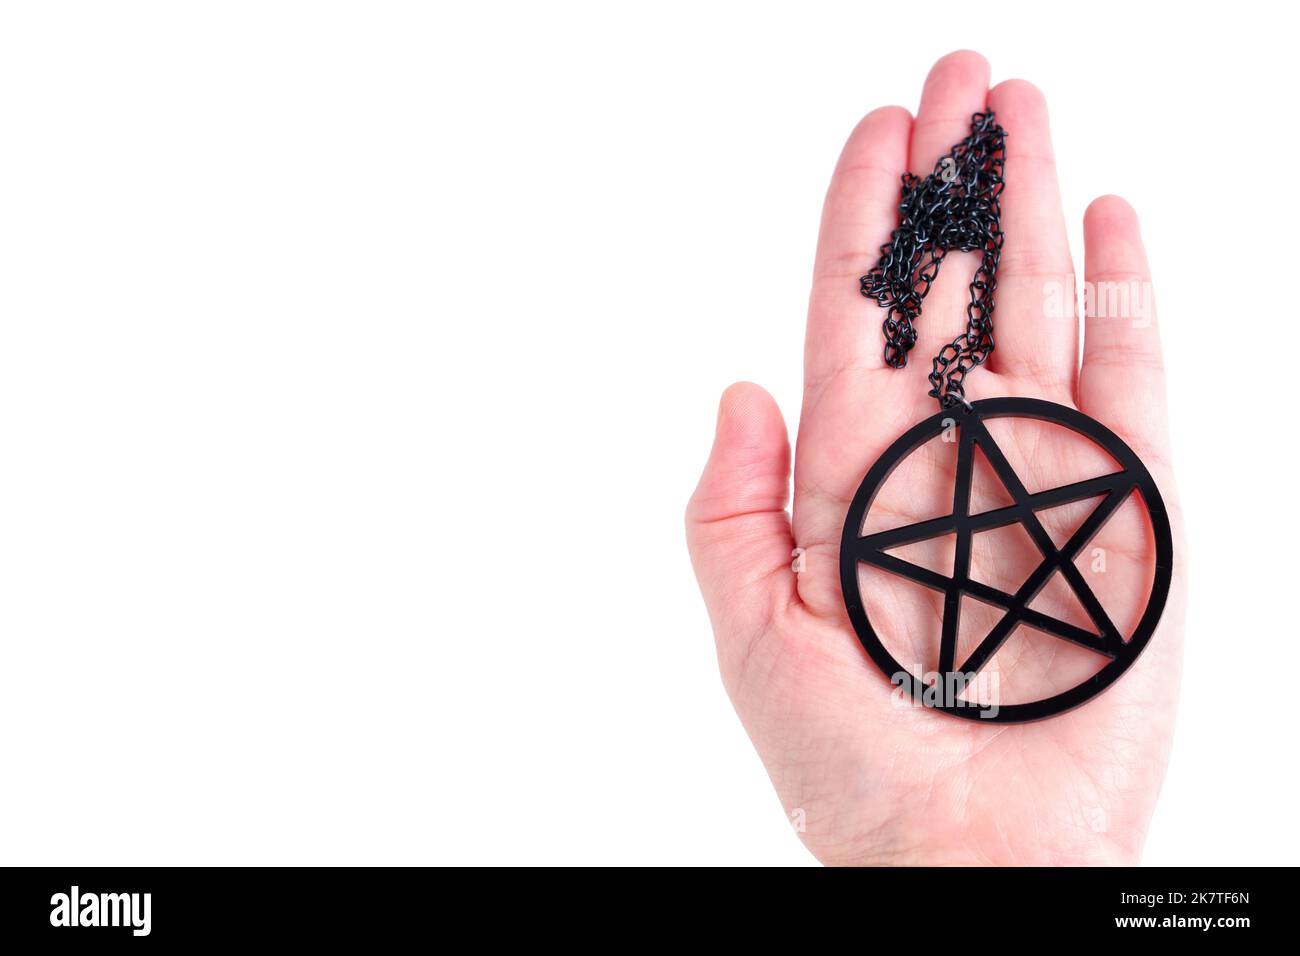 Large black pentagram pendant in hand isolated on white background with copy space Stock Photo